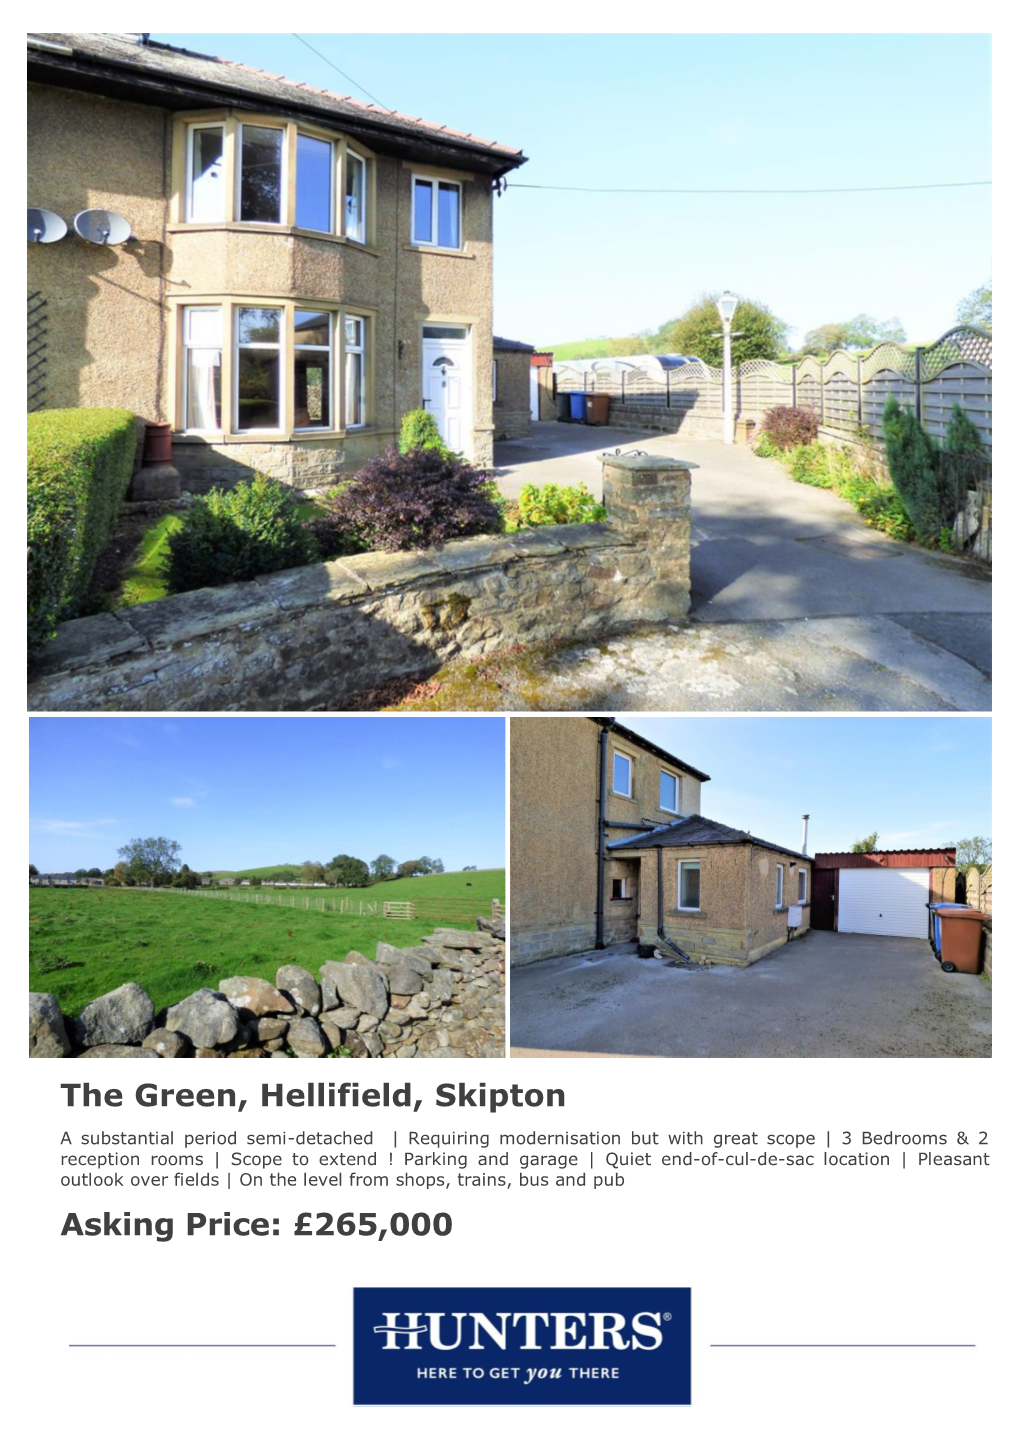 The Green, Hellifield, Skipton Asking Price